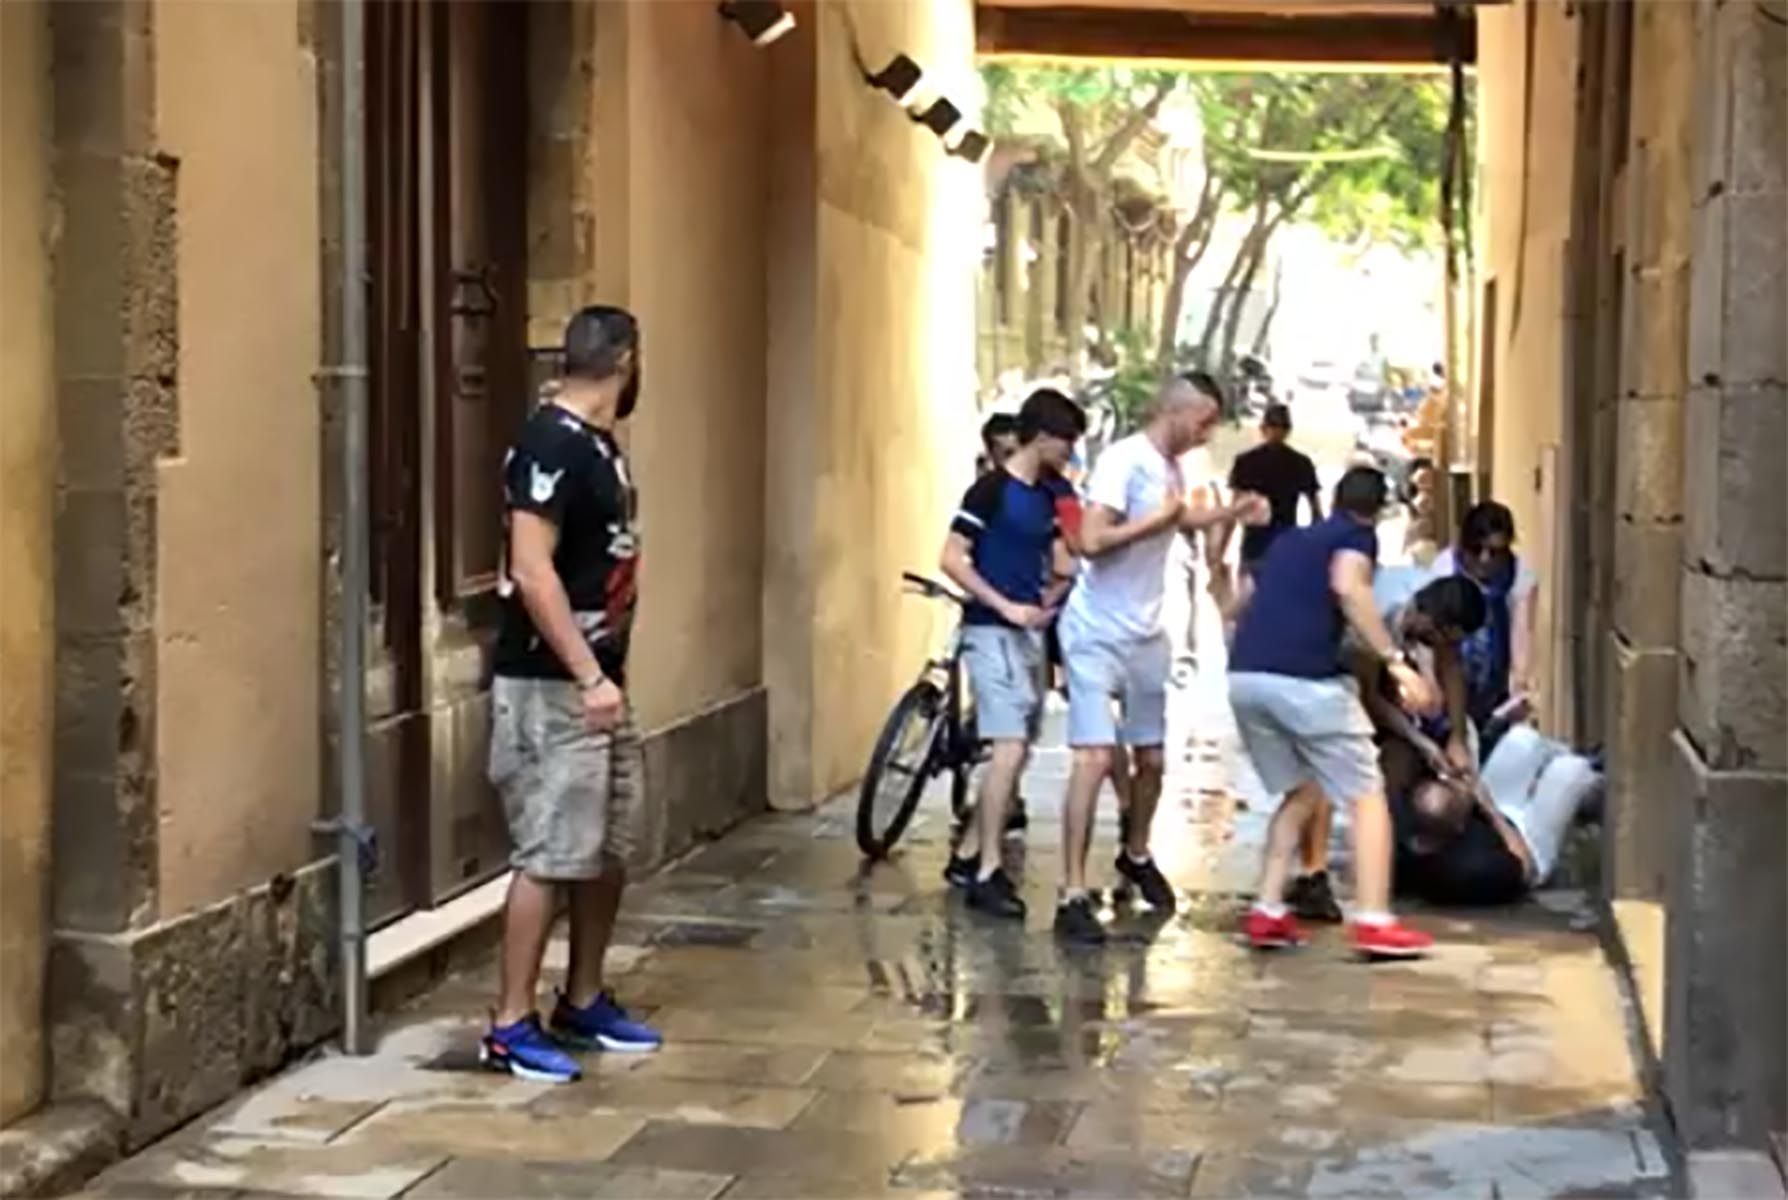 VIDEO: Tourist couple mugged by youths in broad daylight in central Barcelona